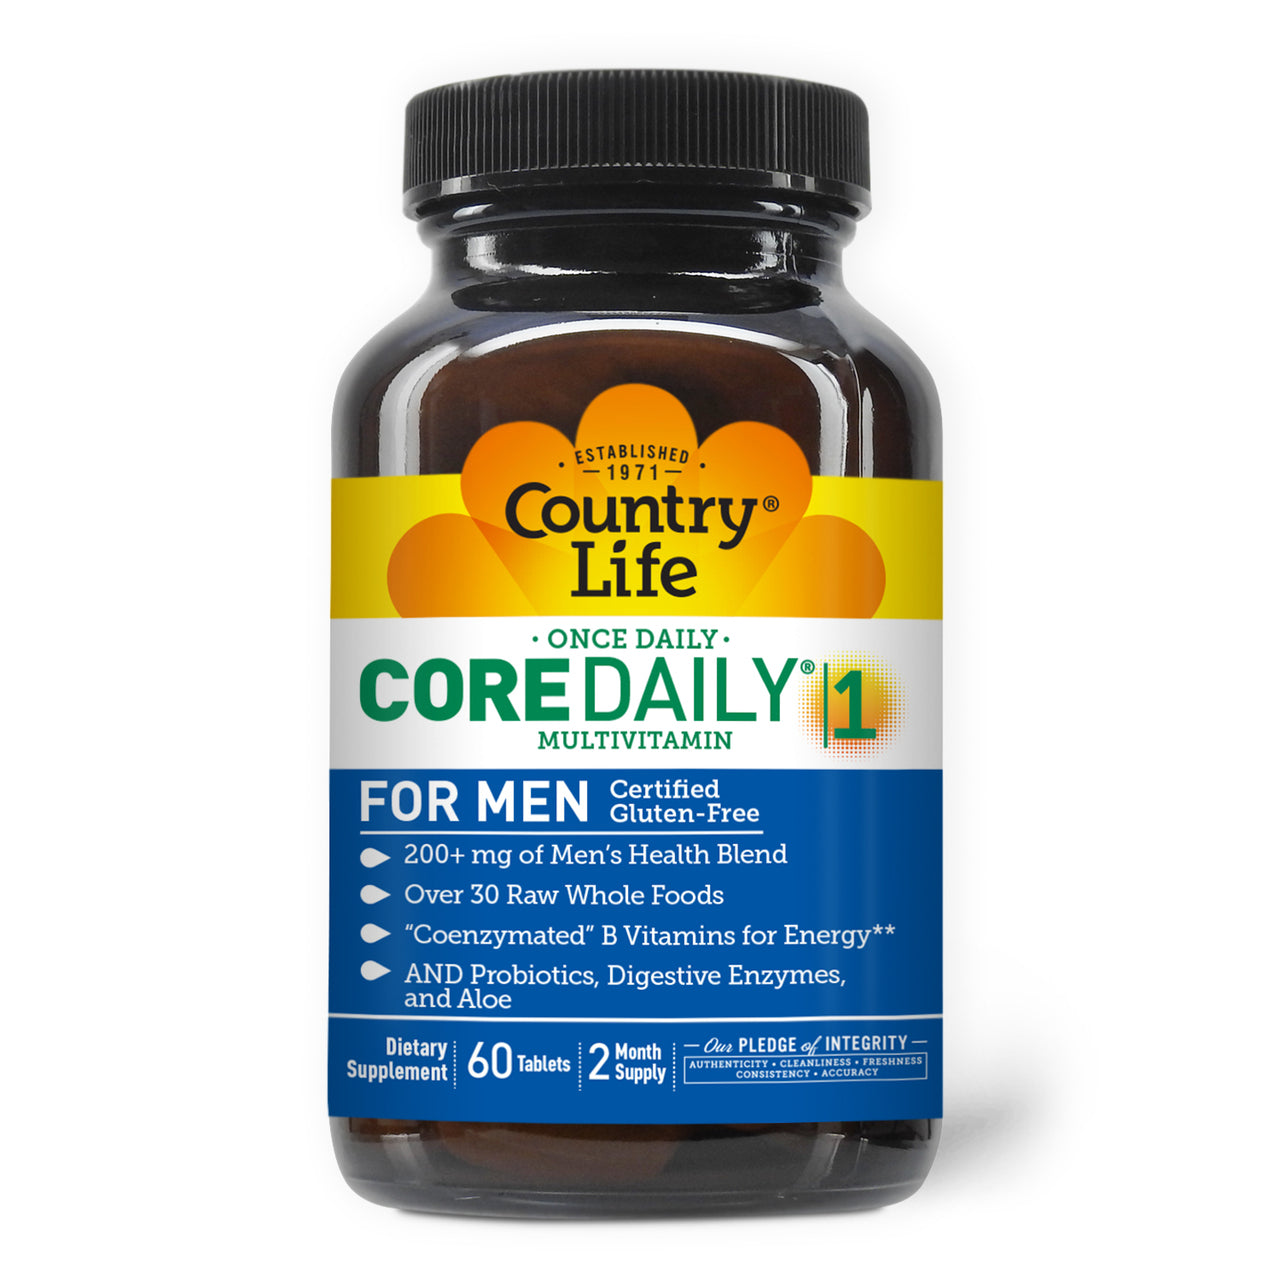 CLV CORE DAILY 1 FOR MEN ( 1 X 60 TAB  )